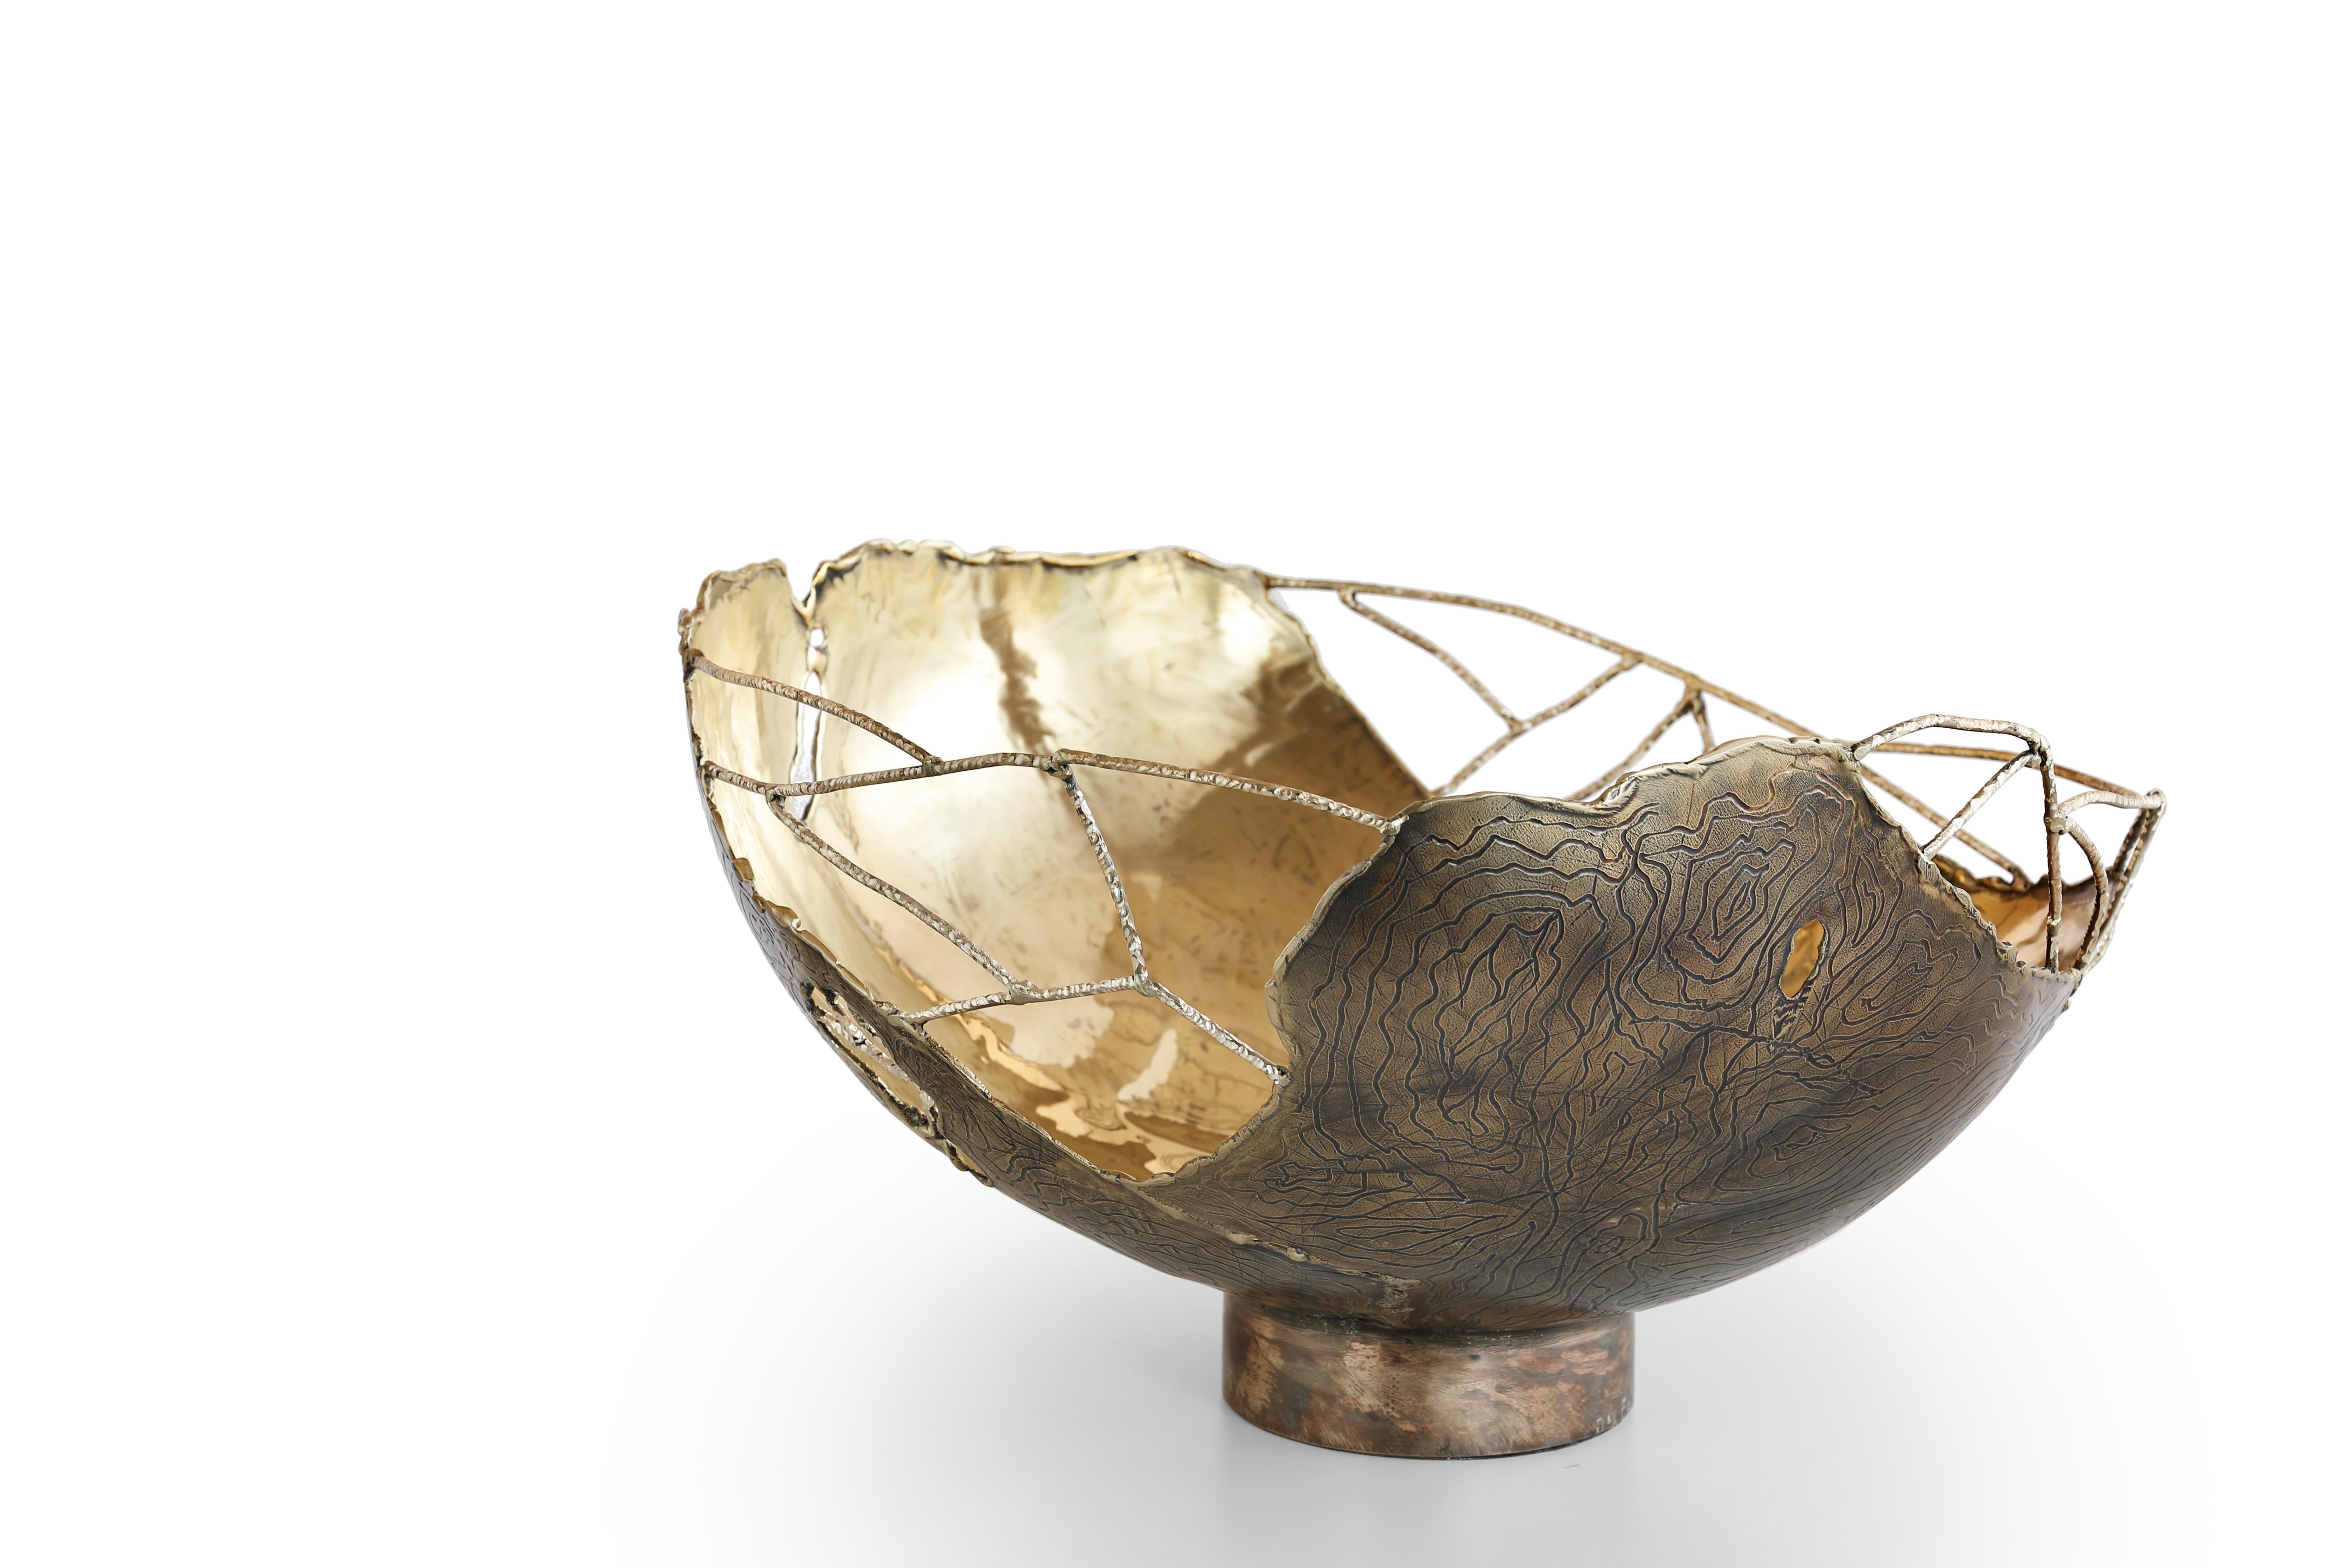 Cylindrical modern bowl in hammered brass molded with fire. Spider webs in welded brass wire. External surface carved with burnished and polished veins. Entirely handmade in Italy signed and numbered.

The power of fire, the connections between